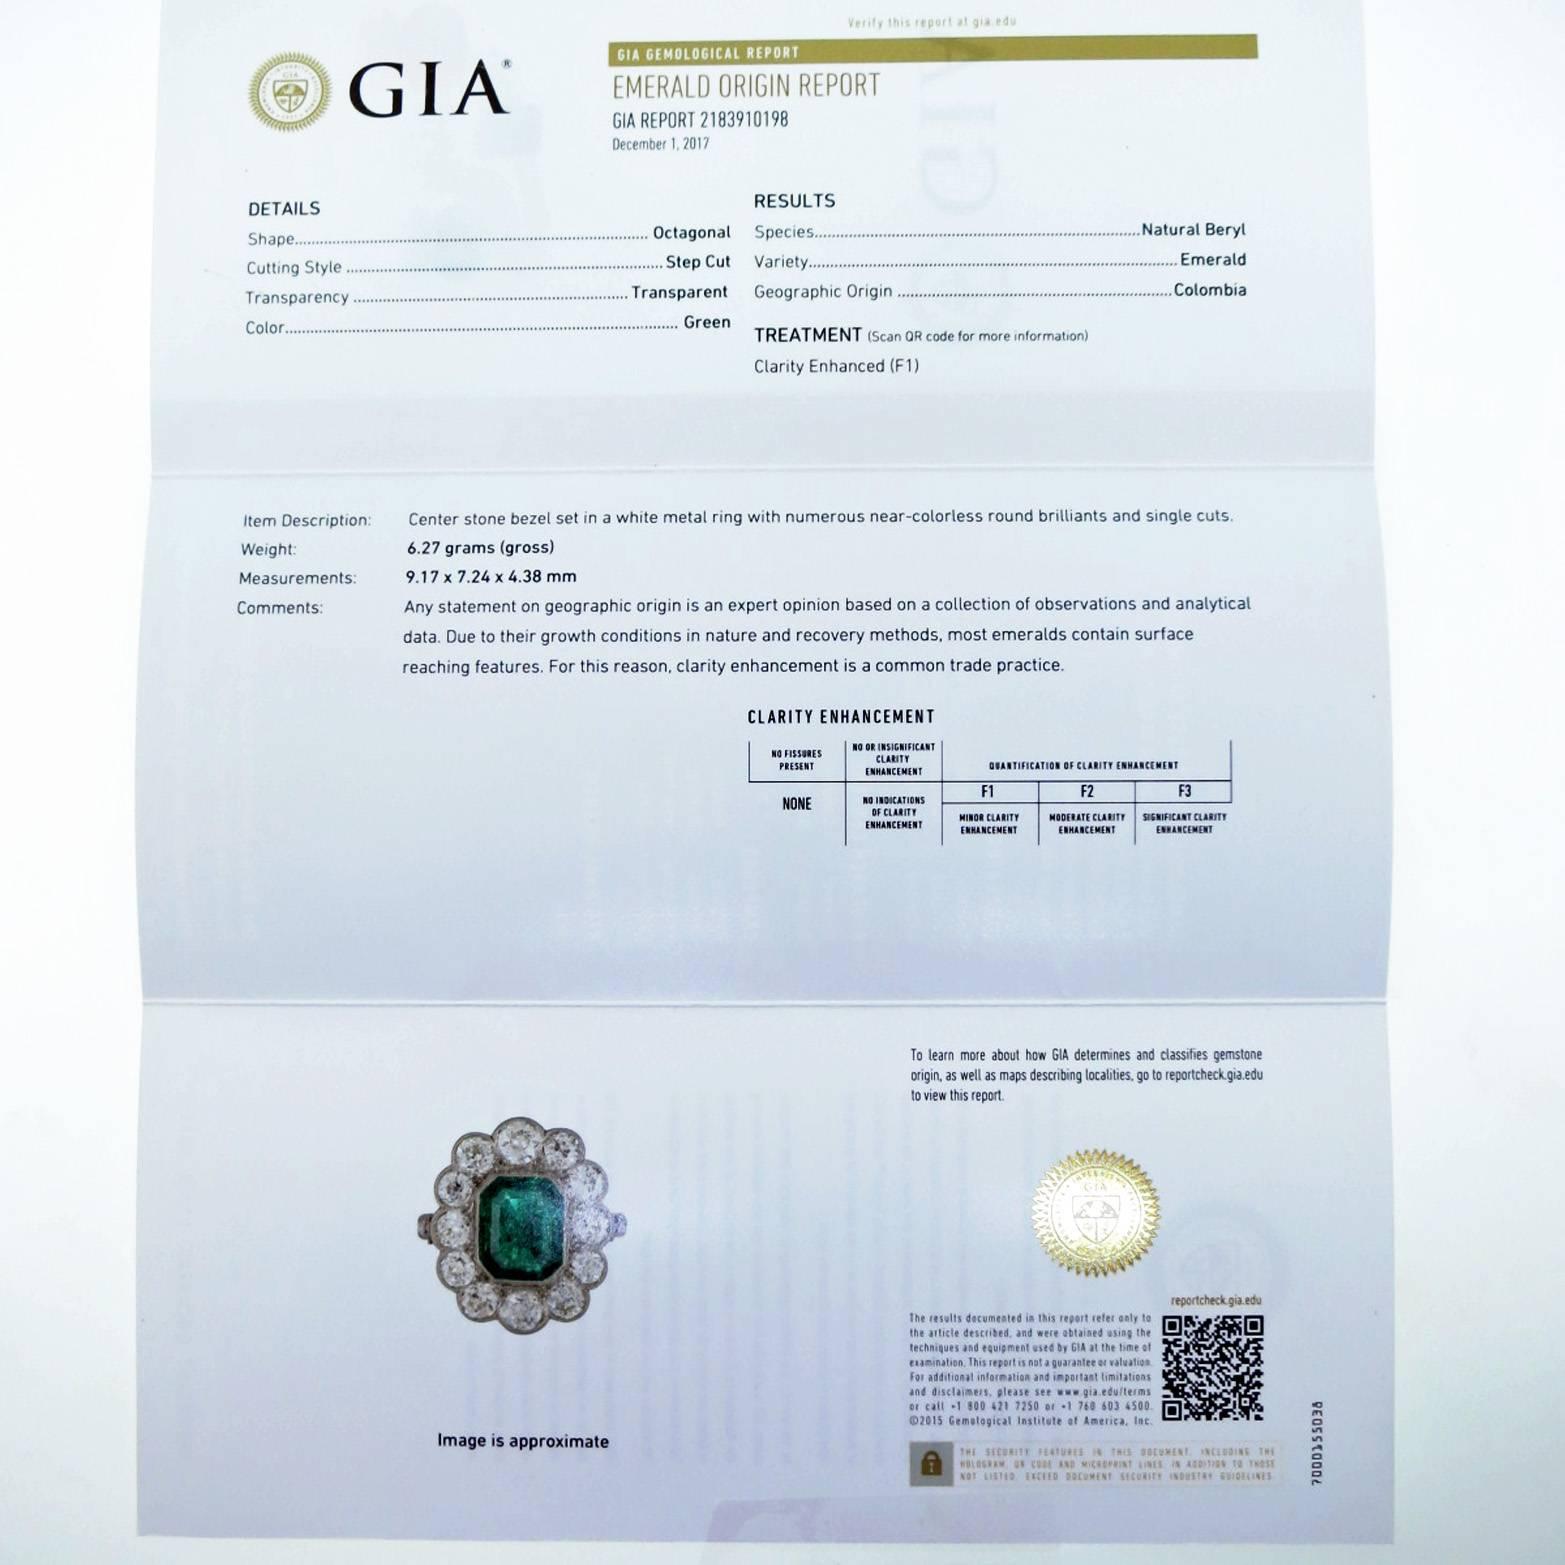 Handmade platinum mount emerald and diamond ring. The center is set with a natural GIA report  #2183910198 octagonal step cut emerald measuring 8.1mm. x 7.24mm. x 4.38mm. weighing approx 2.0cts. surrounded with 12 old European cut diamonds totaling